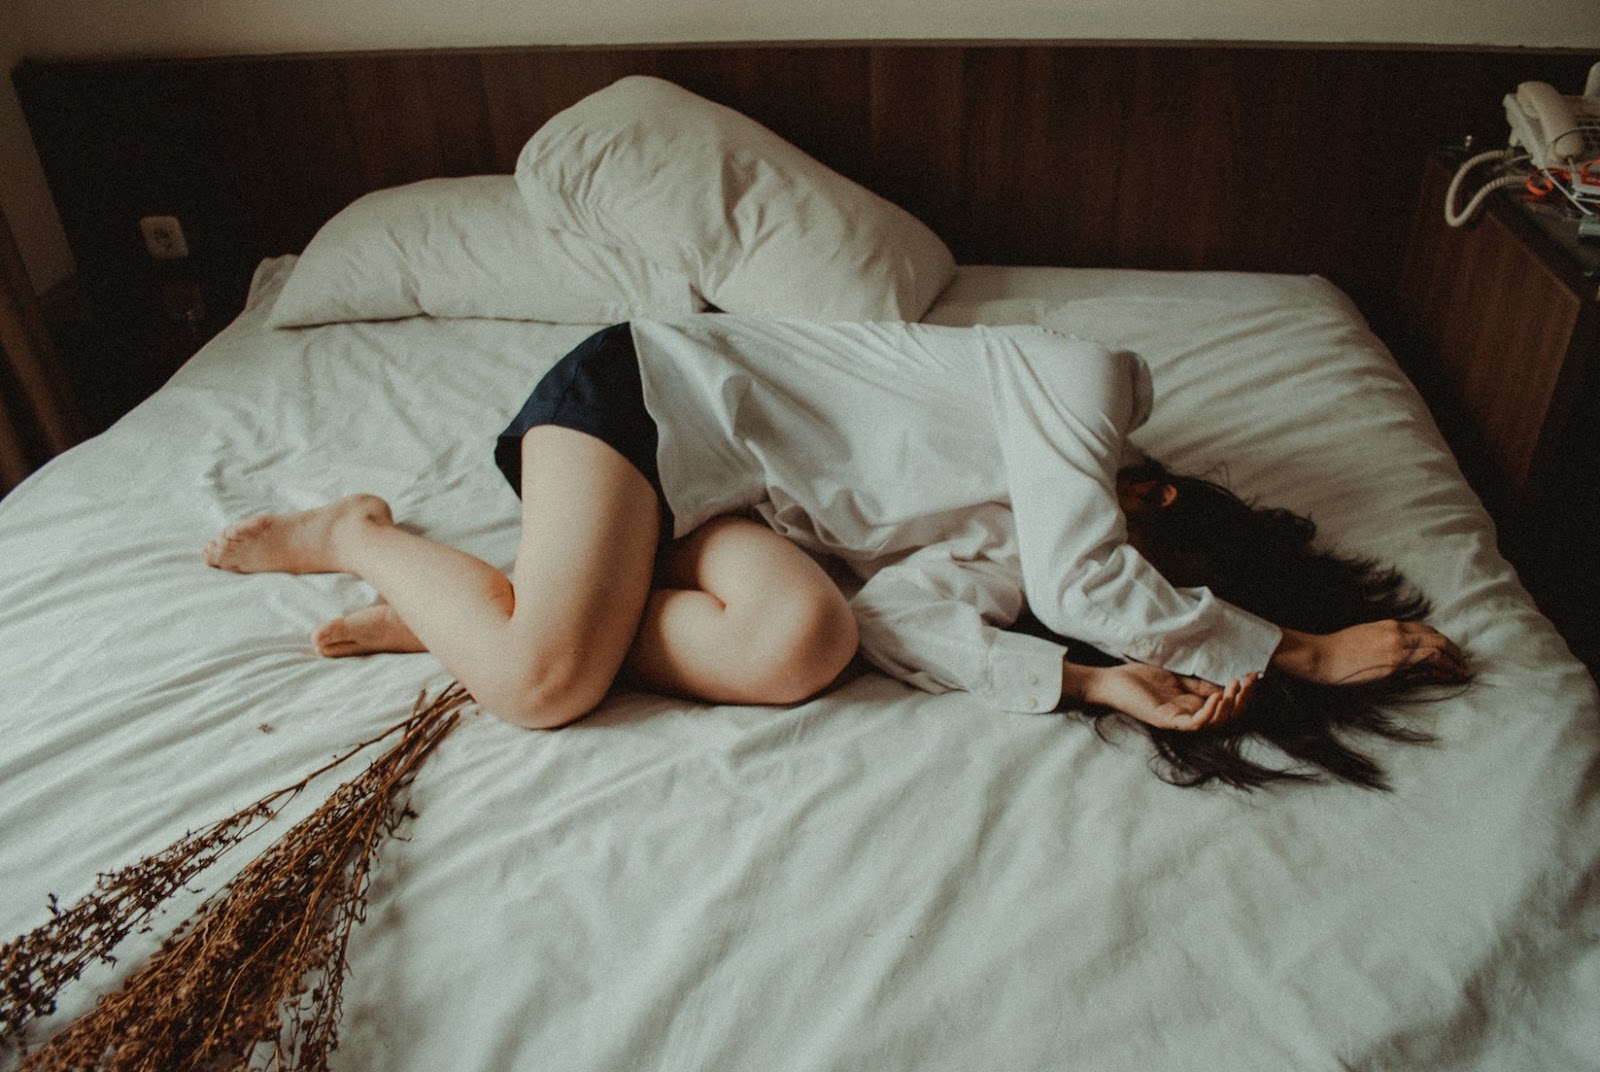 6 Warning Signs Of A Nervous Breakdown We All Need To Be Aware Of